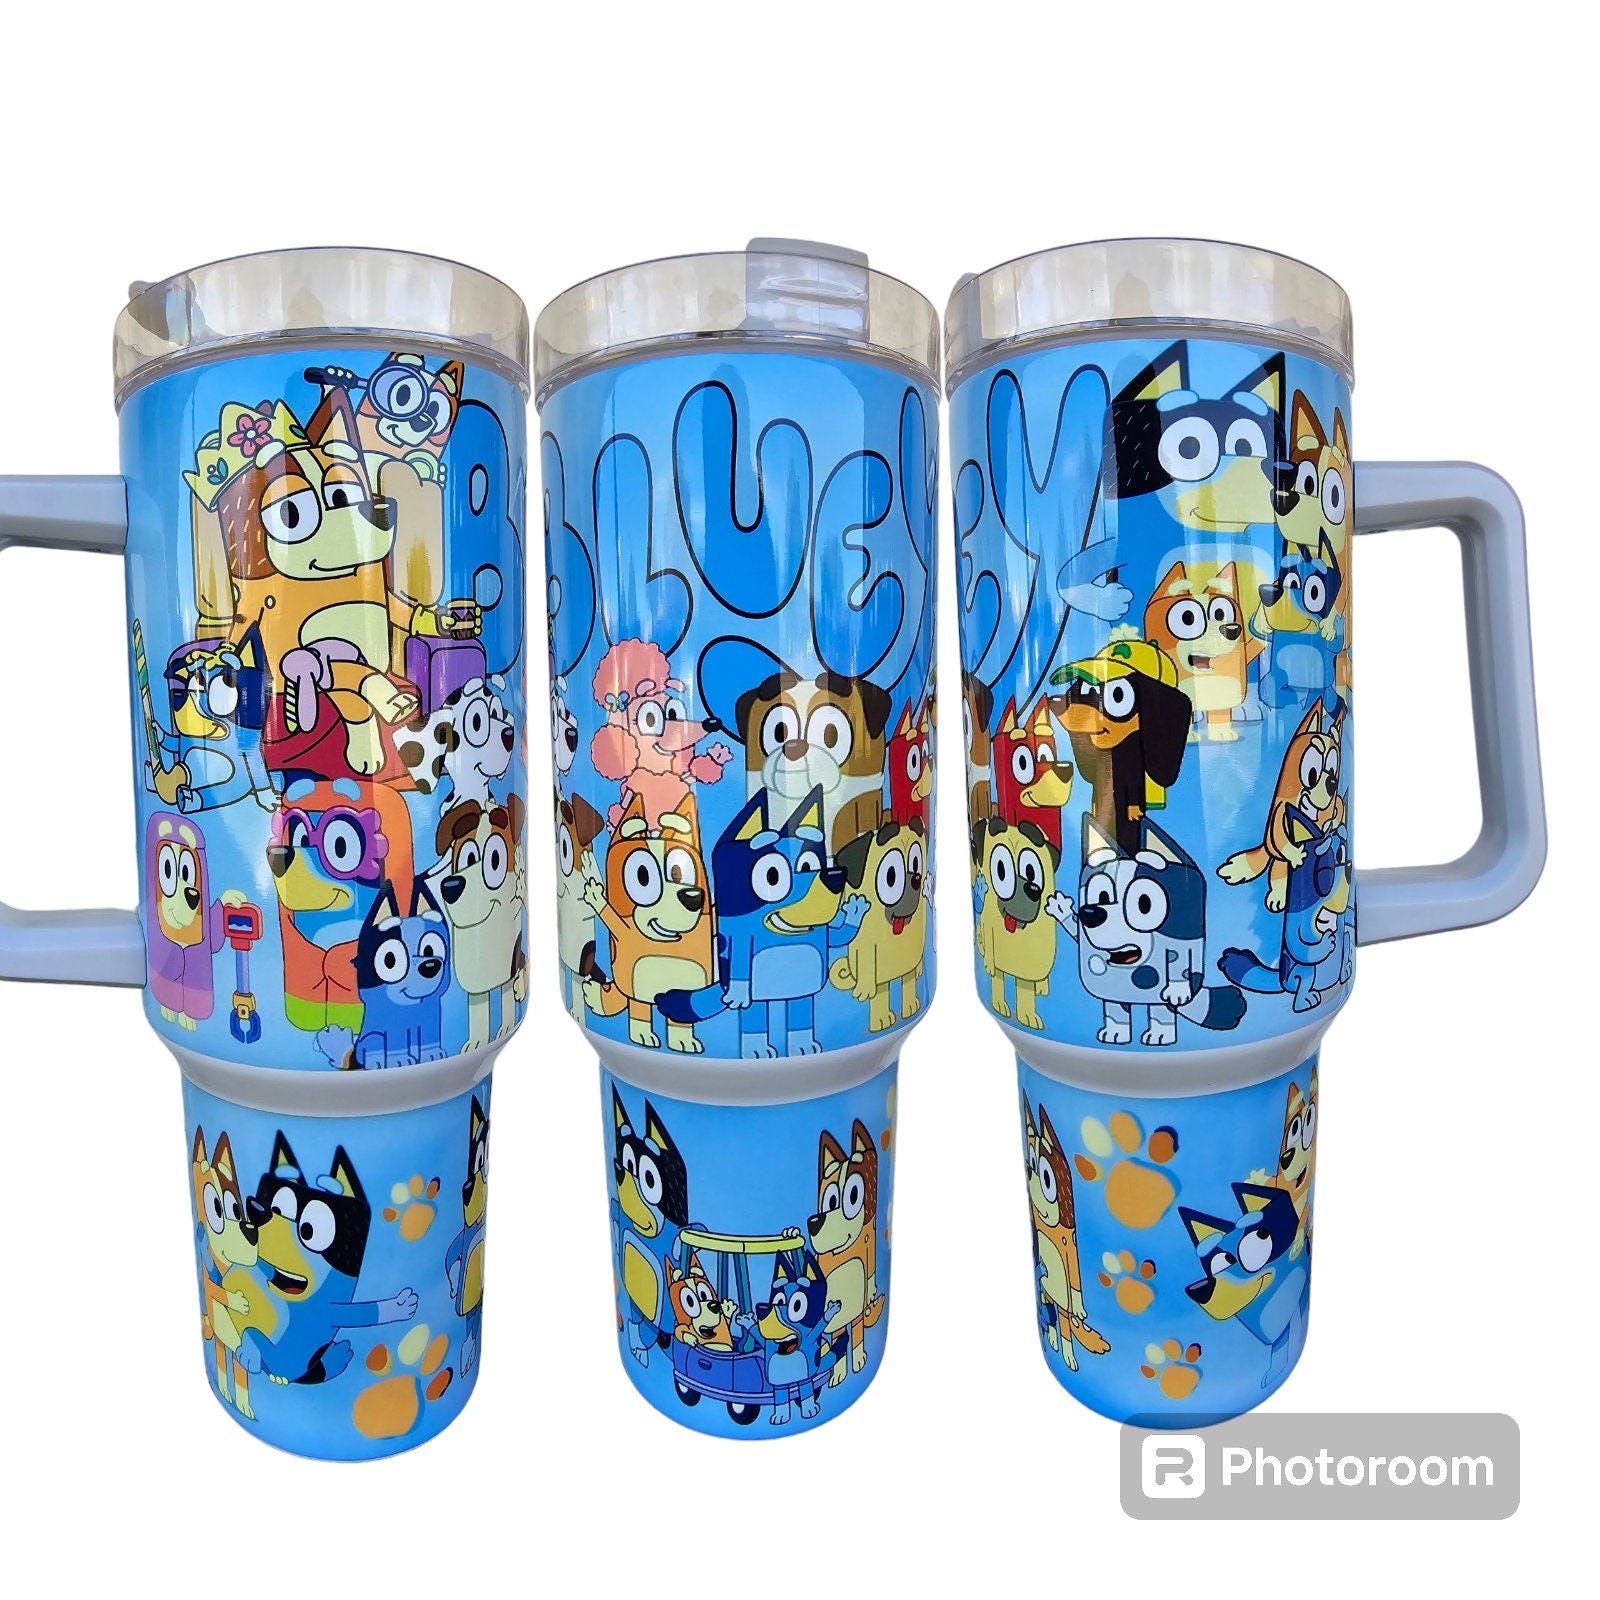 Bluey inspired 40oz Tumbler Cup Mug Cartoon Insulated Drinkware Gift for her or him -stainless steel